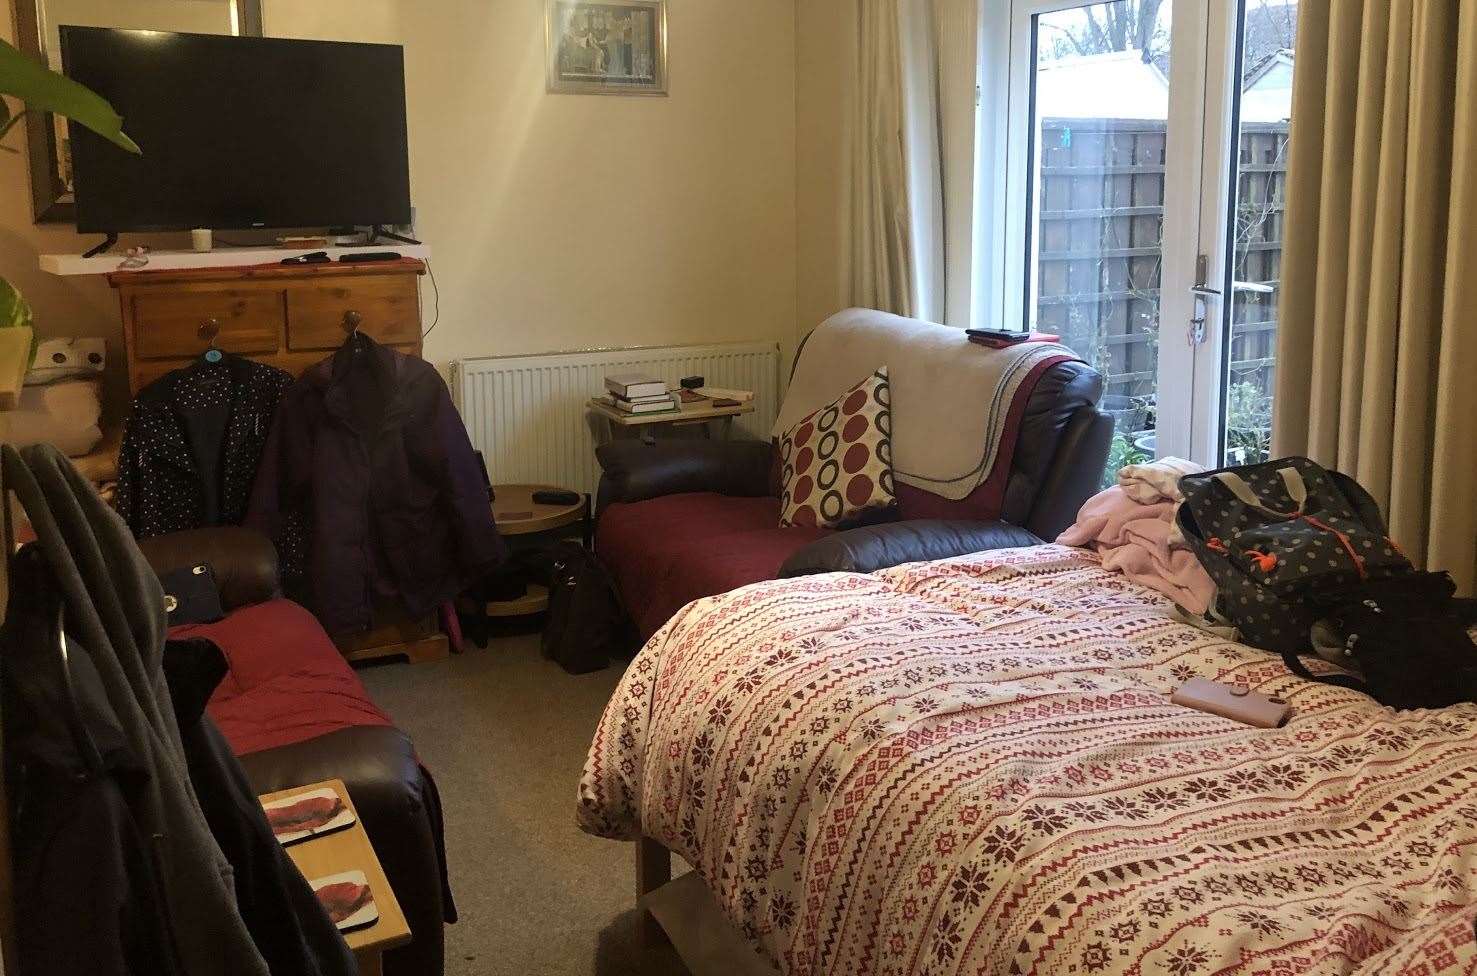 The couple have been living out of the front room of their Ramsgate home